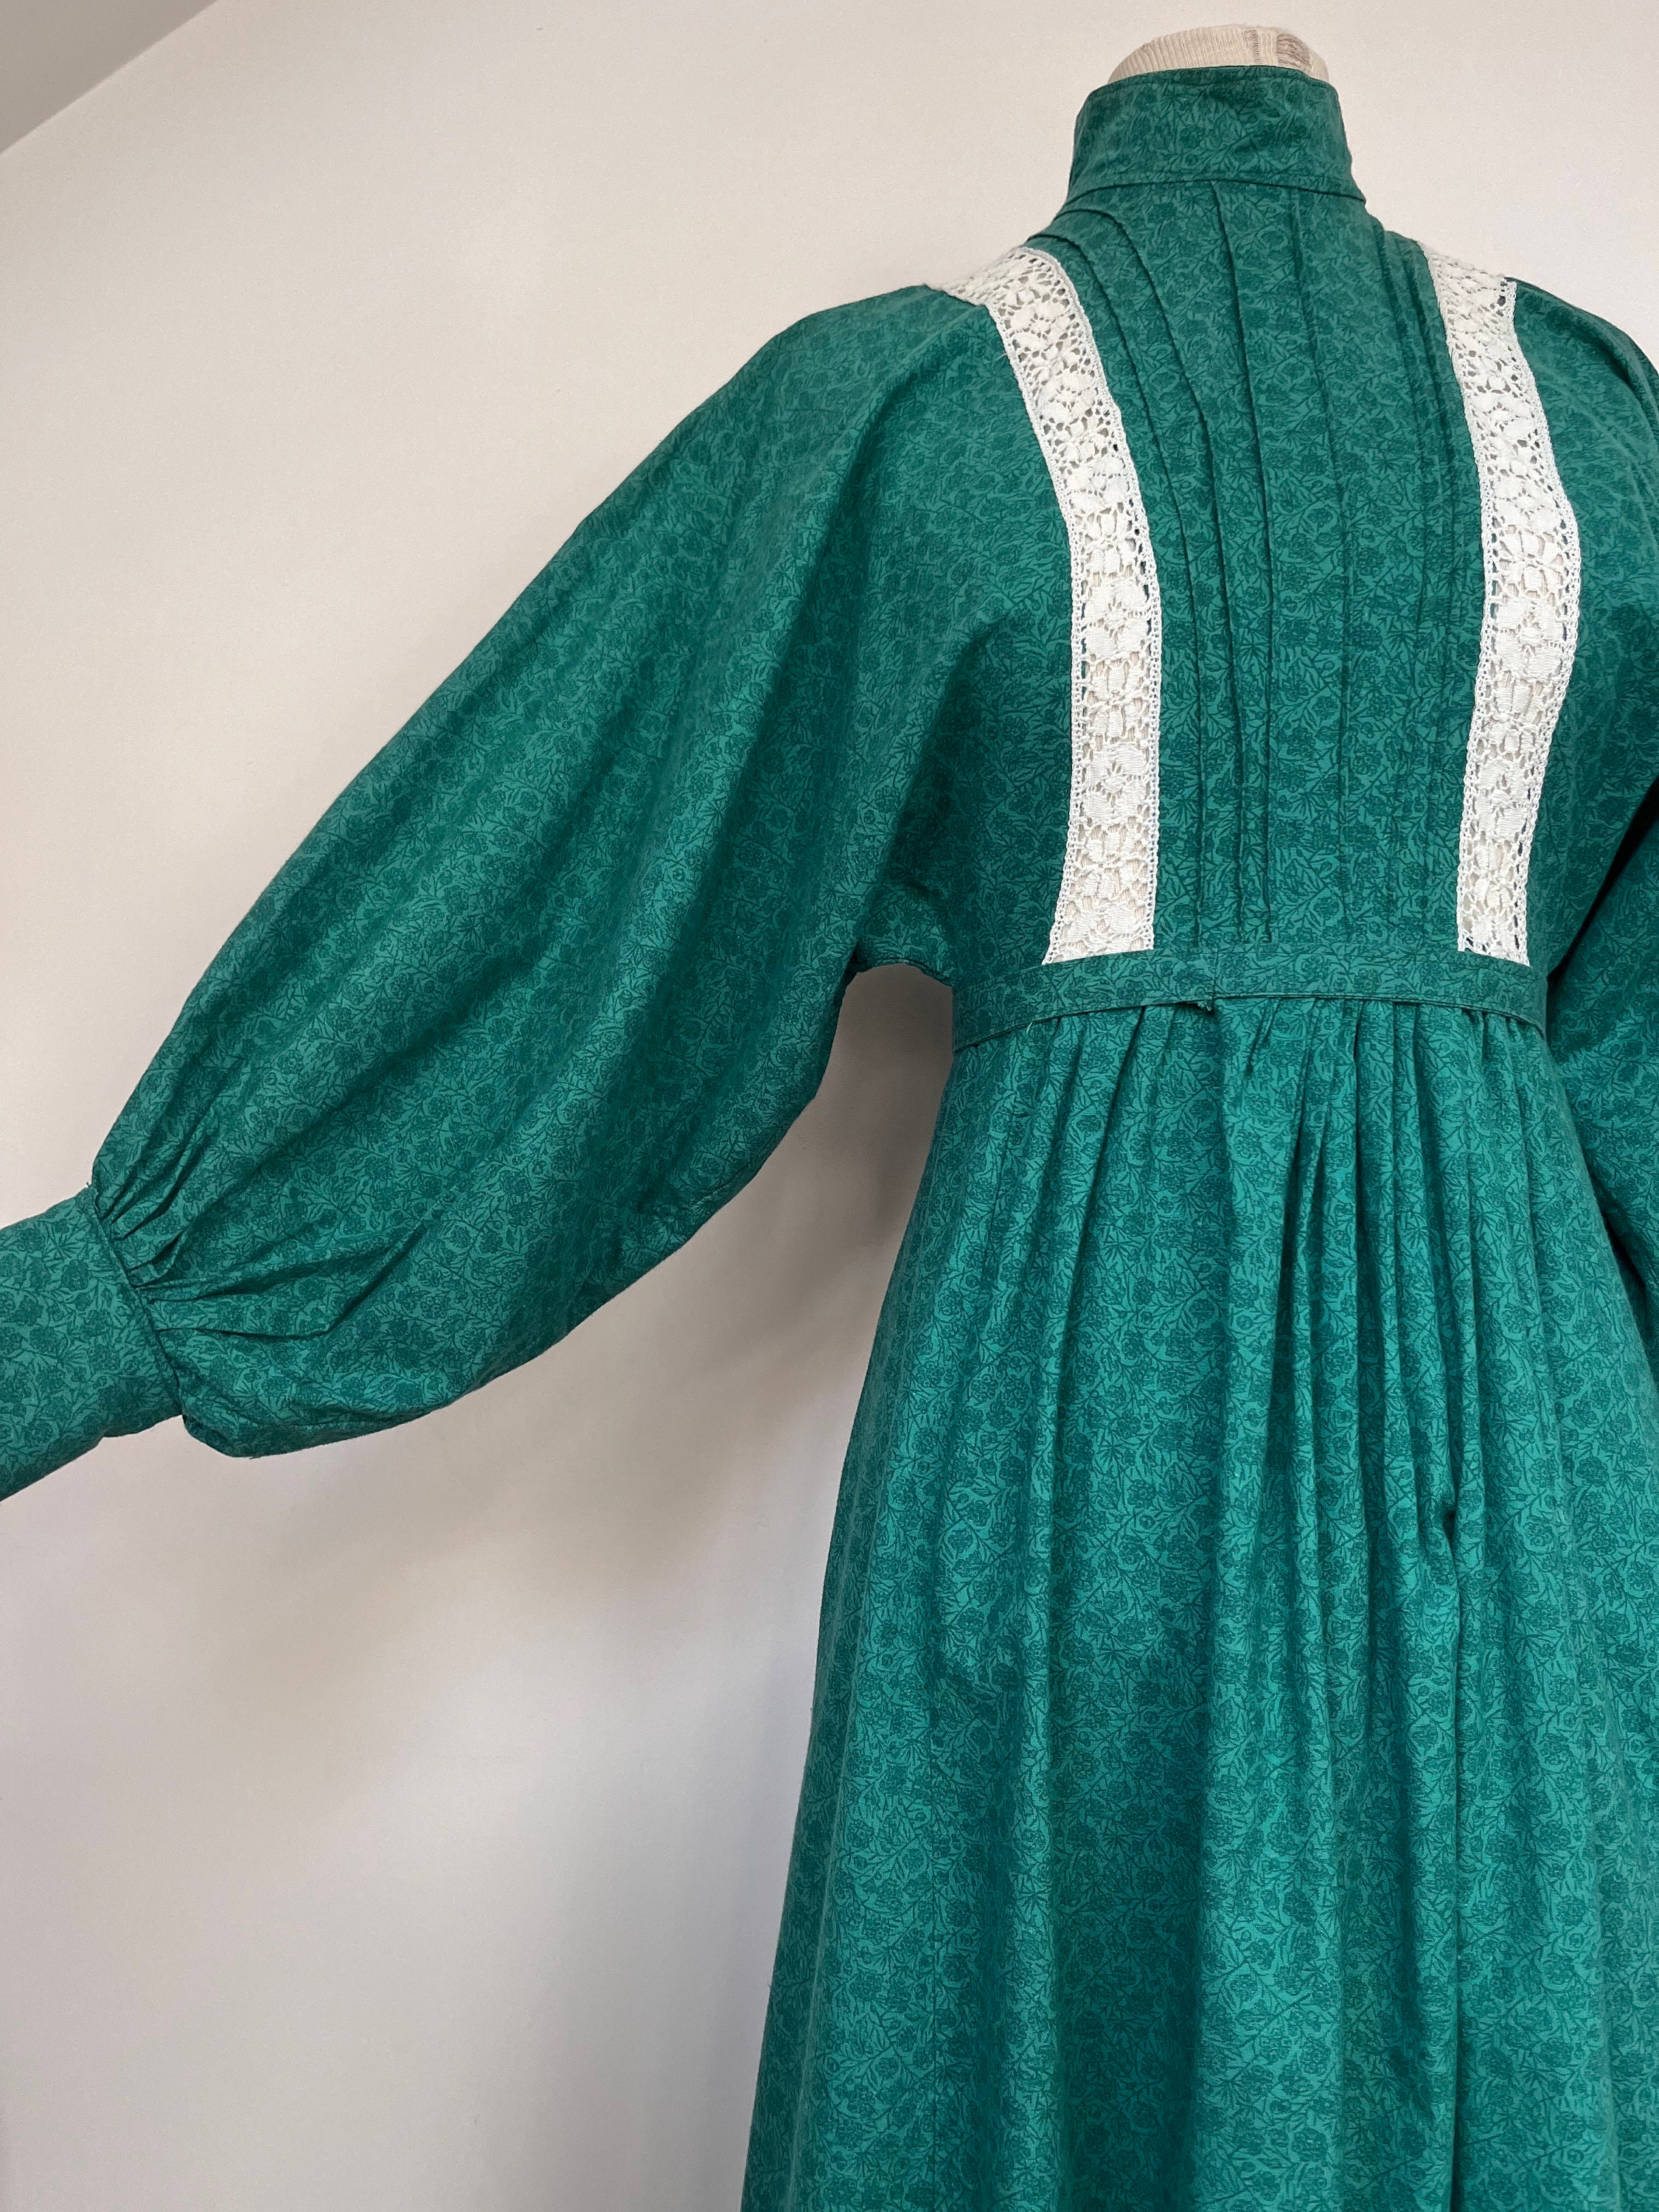 RARE 1970s LAURA ASHLEY Dress, Dyers and Printers Made in Wales - Etsy